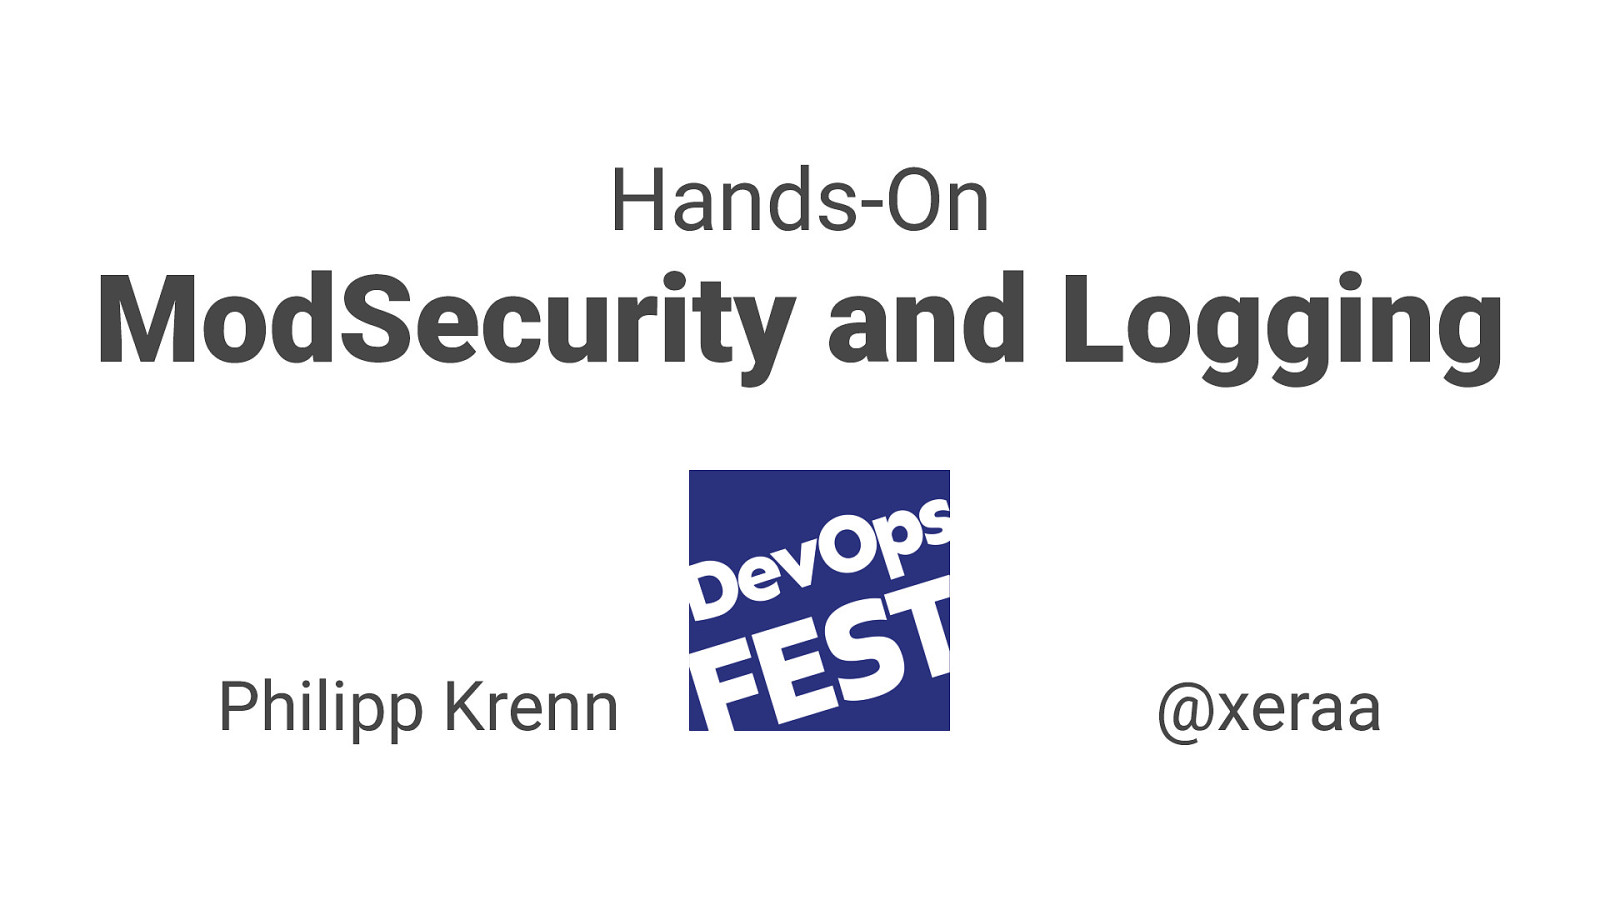 Hands-On ModSecurity and Logging